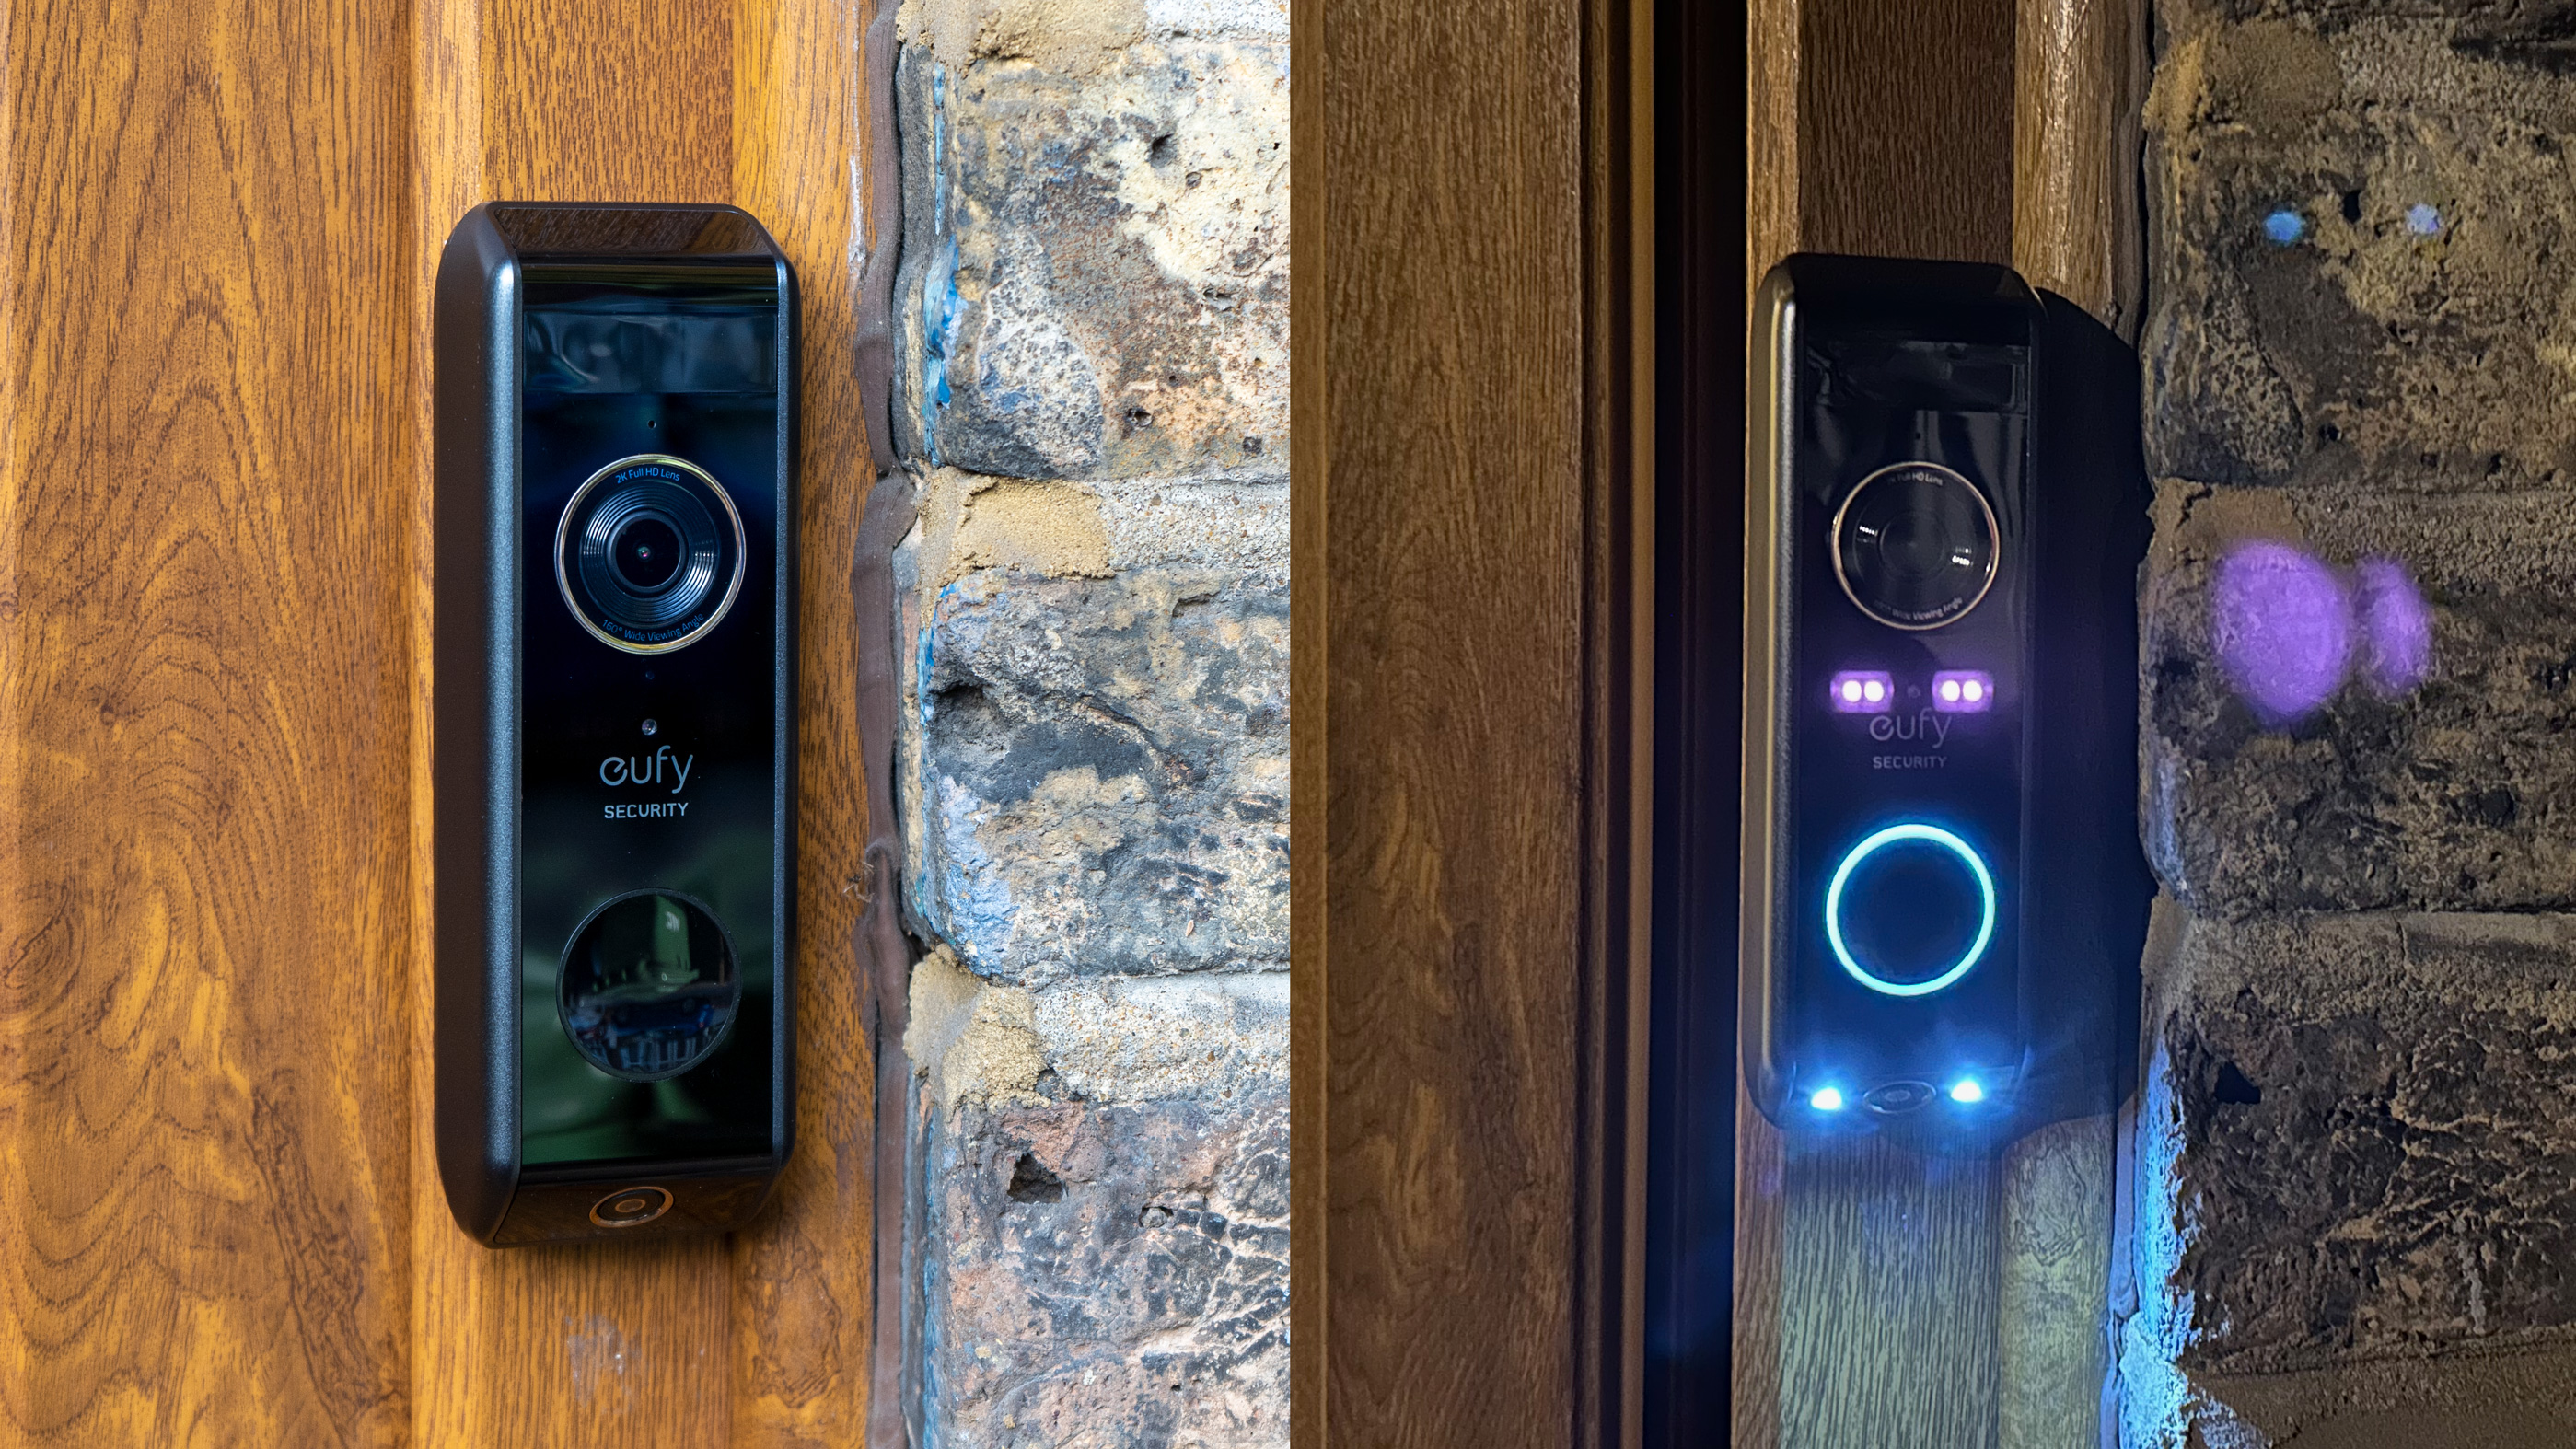 Eufy Video Doorbell Dual Review: Blind spots begone - Reviewed